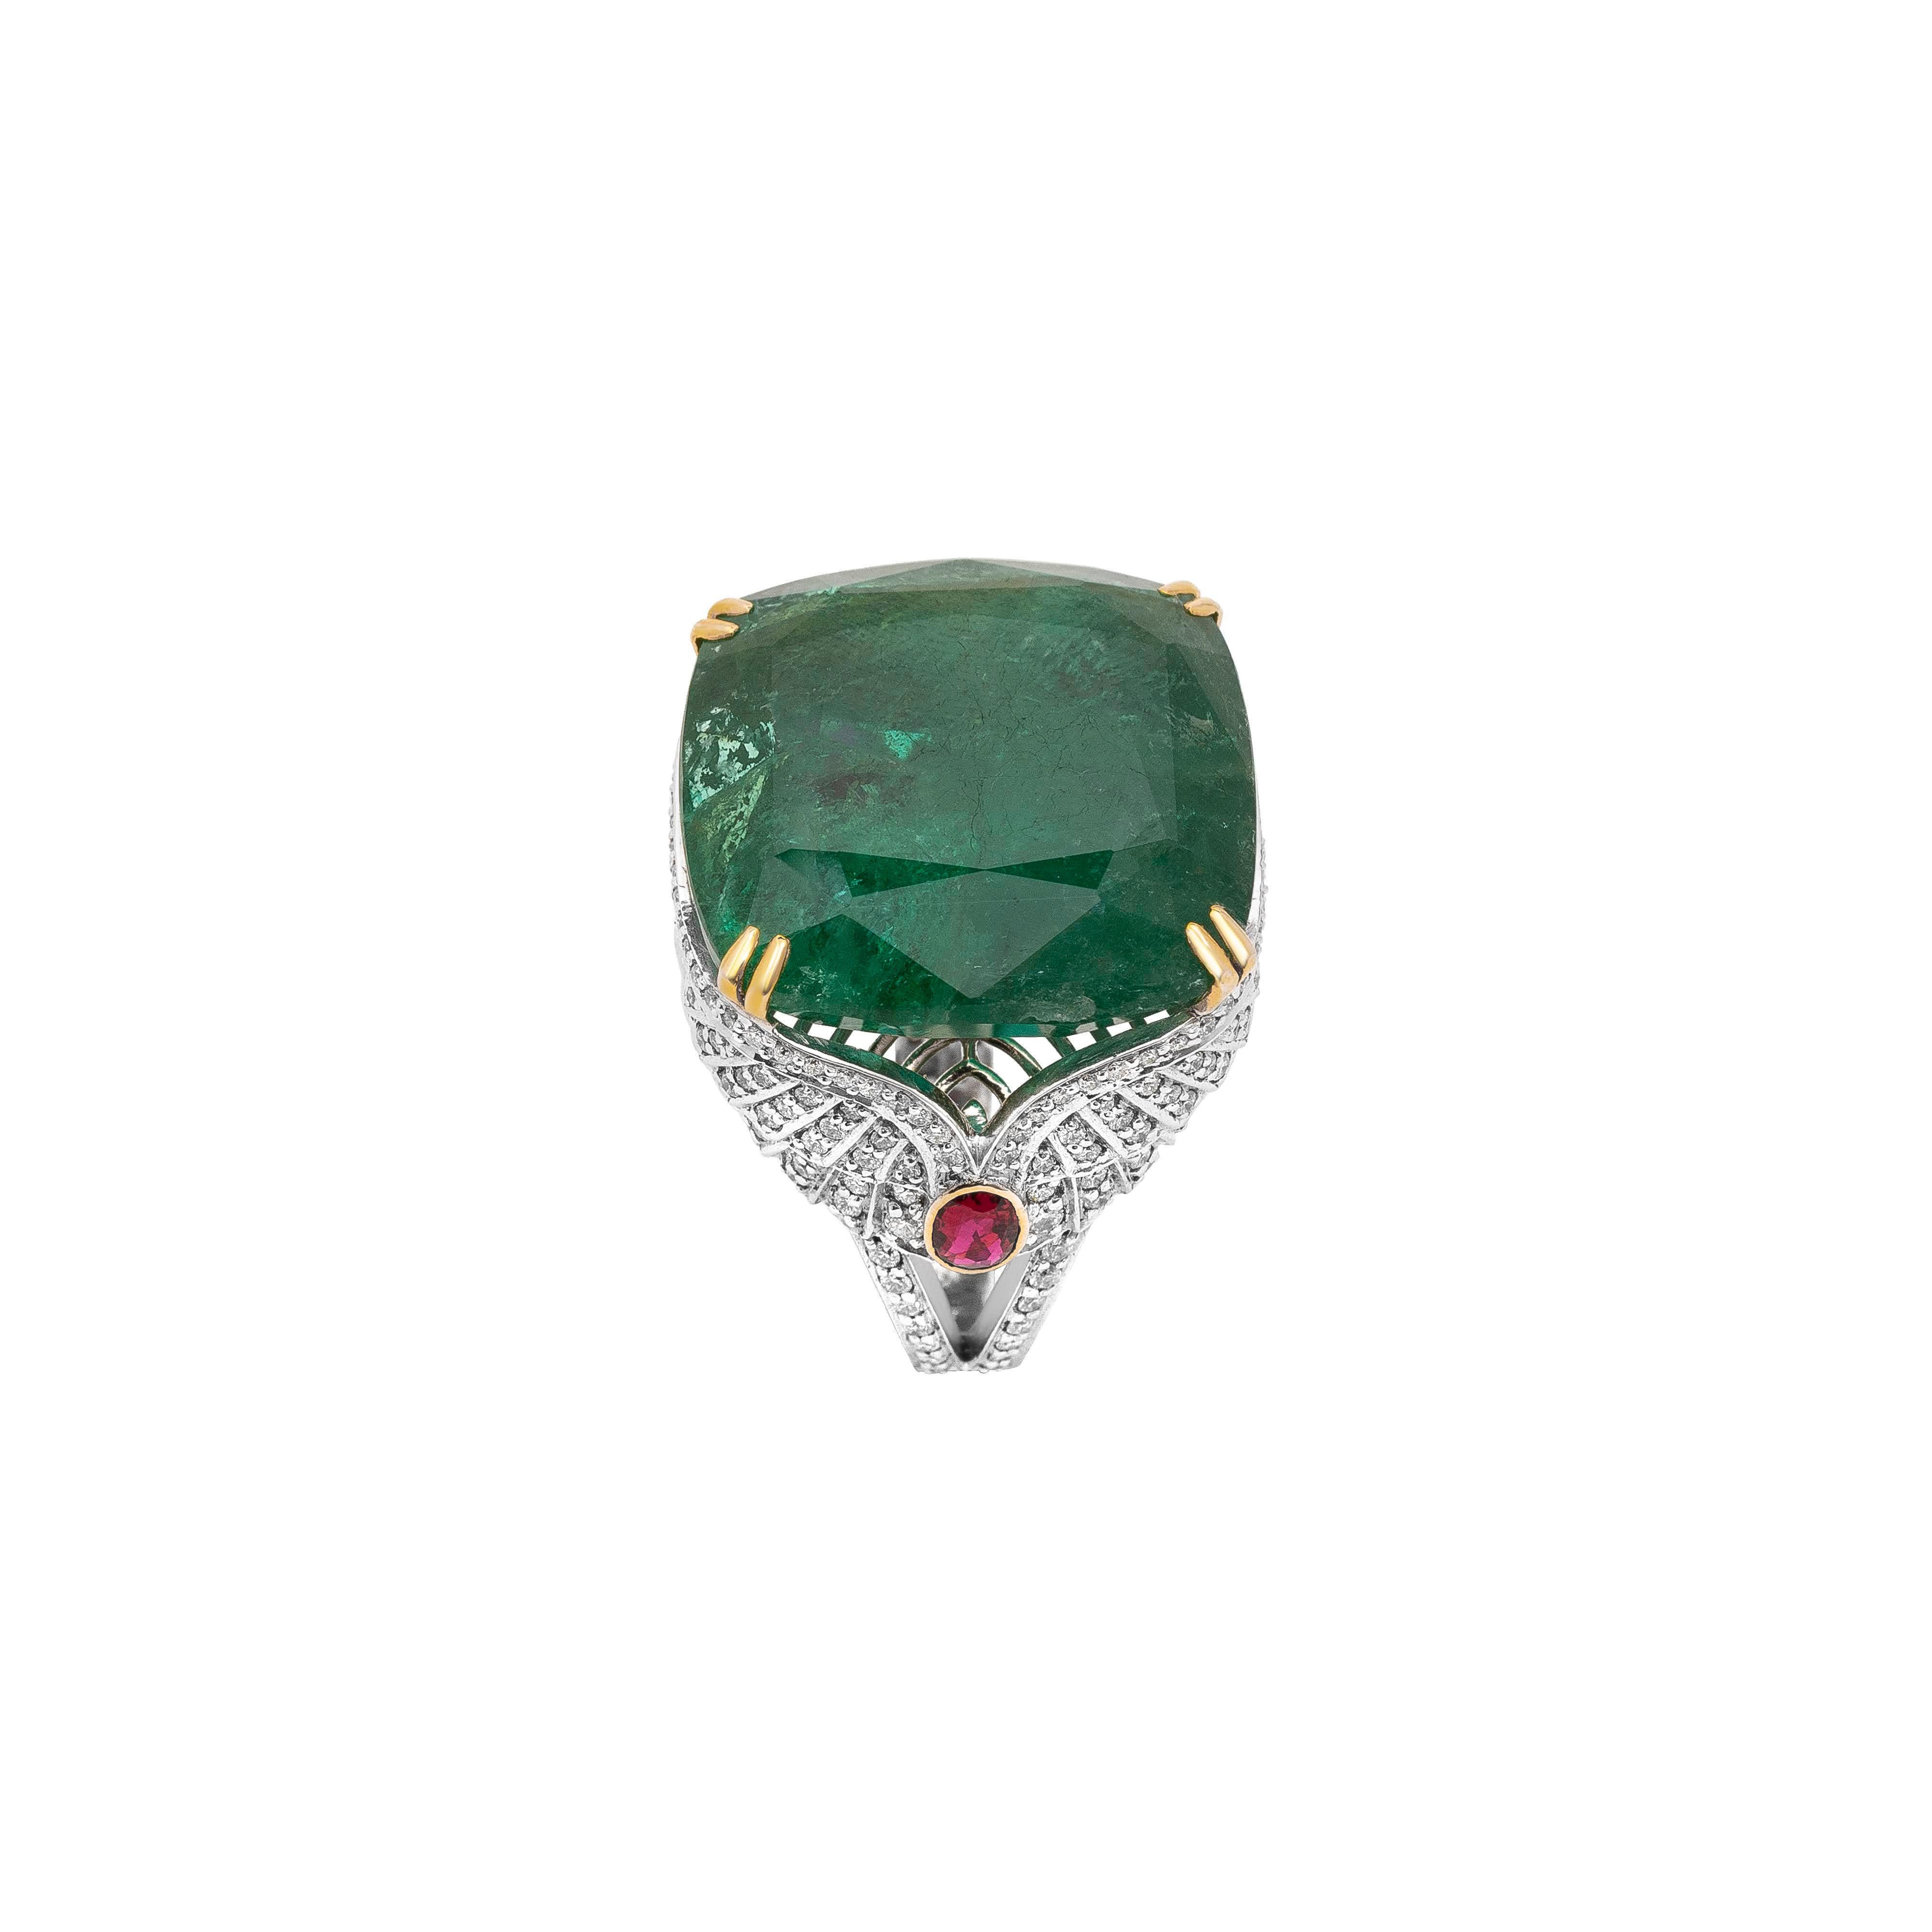 18 Karat White Gold Emerald Ruby And Diamond Cocktail Ring

Beautiful emerald cocktail ring flanked by rubies & accentuated by white diamonds set in 18kt white gold.  
Emerald - 37.77cts
Ruby - 0.82cts
Diamonds - 1.41cts

Ring Size - US Size